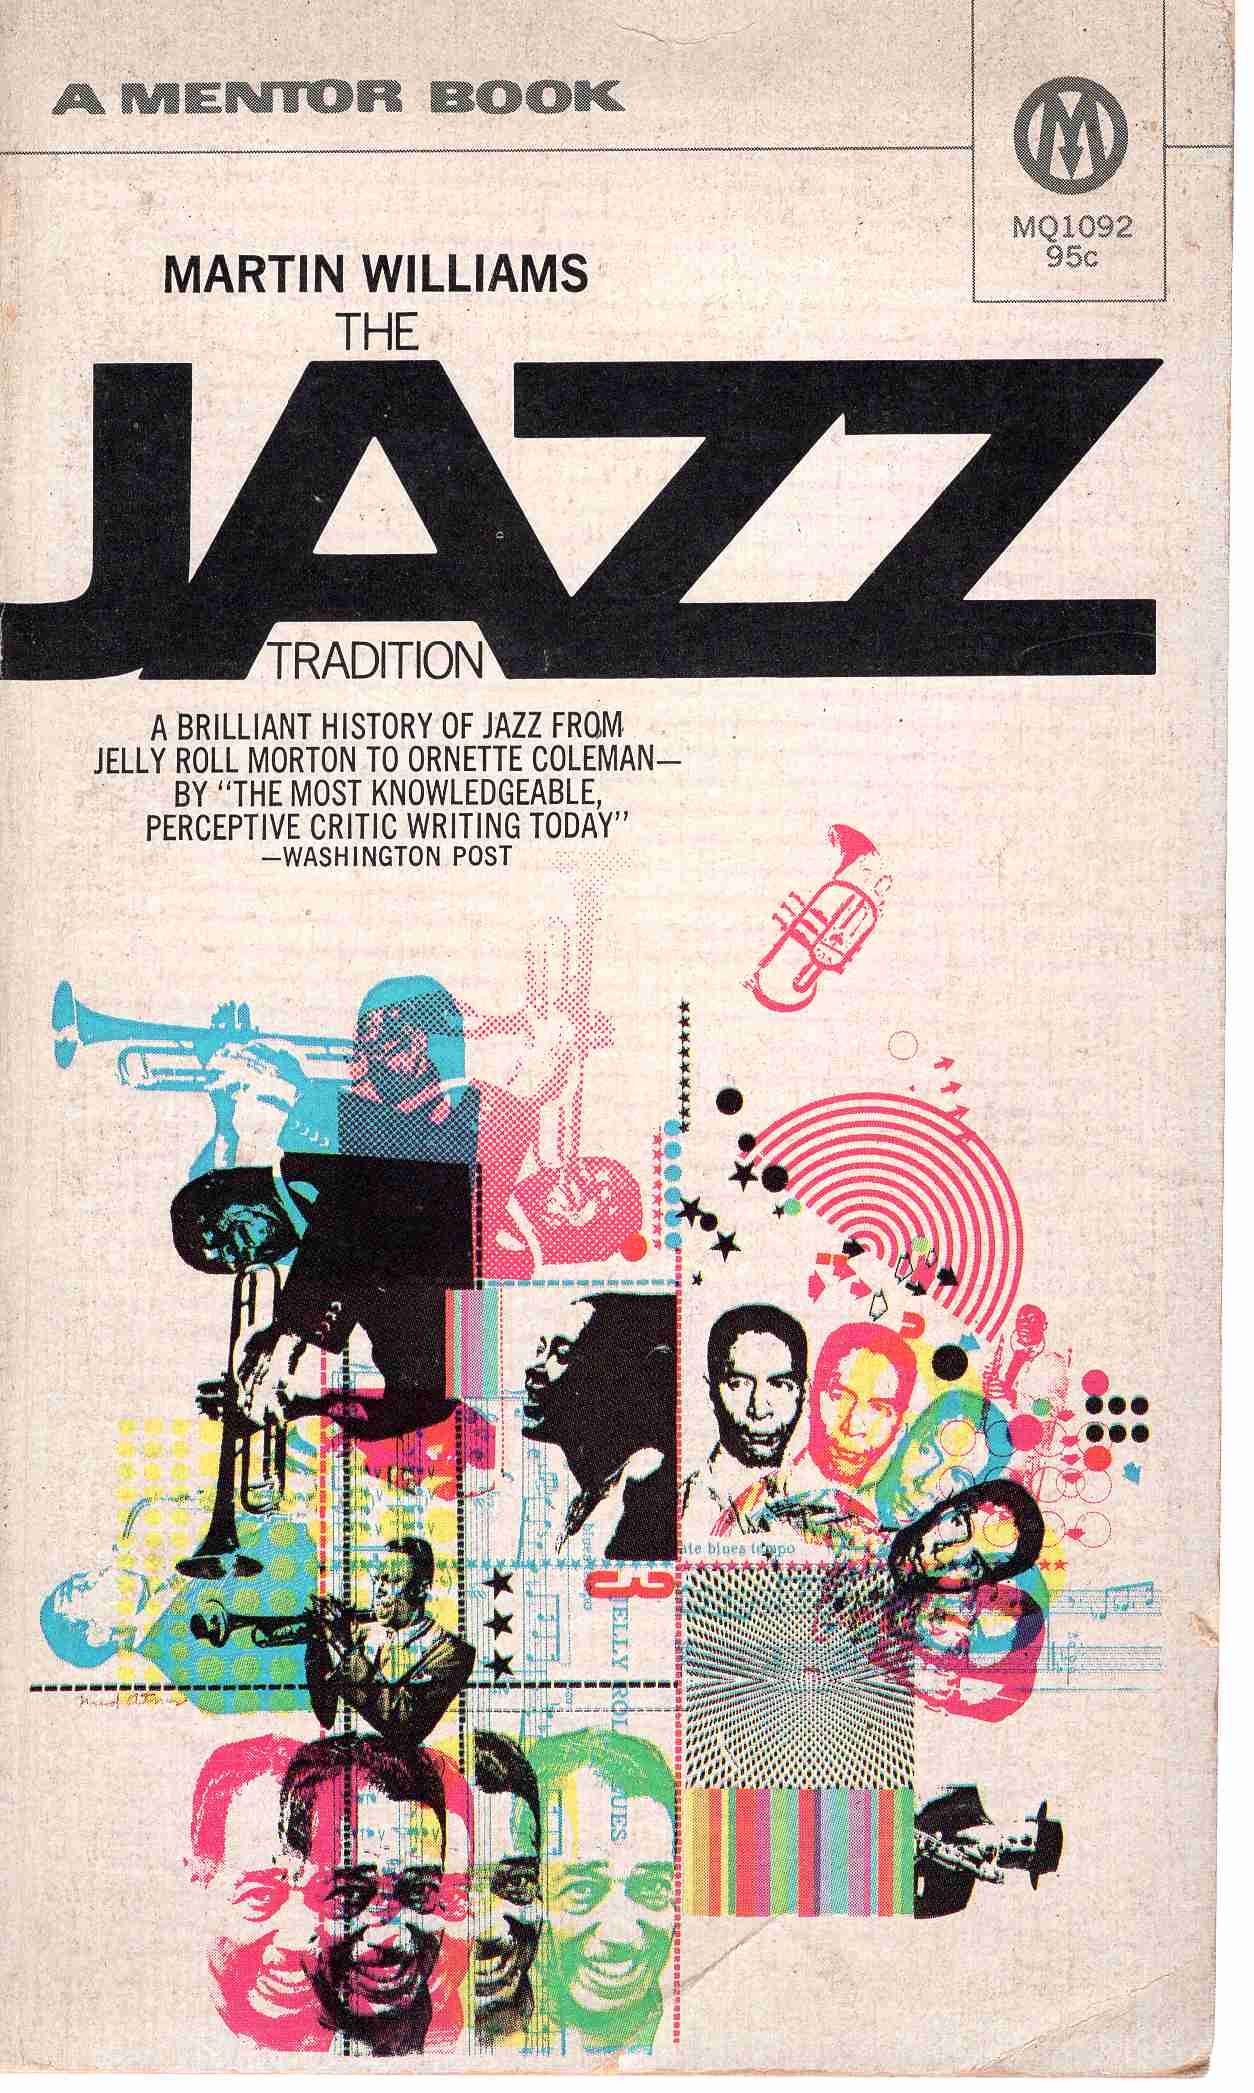 THE JAZZ TRADITION